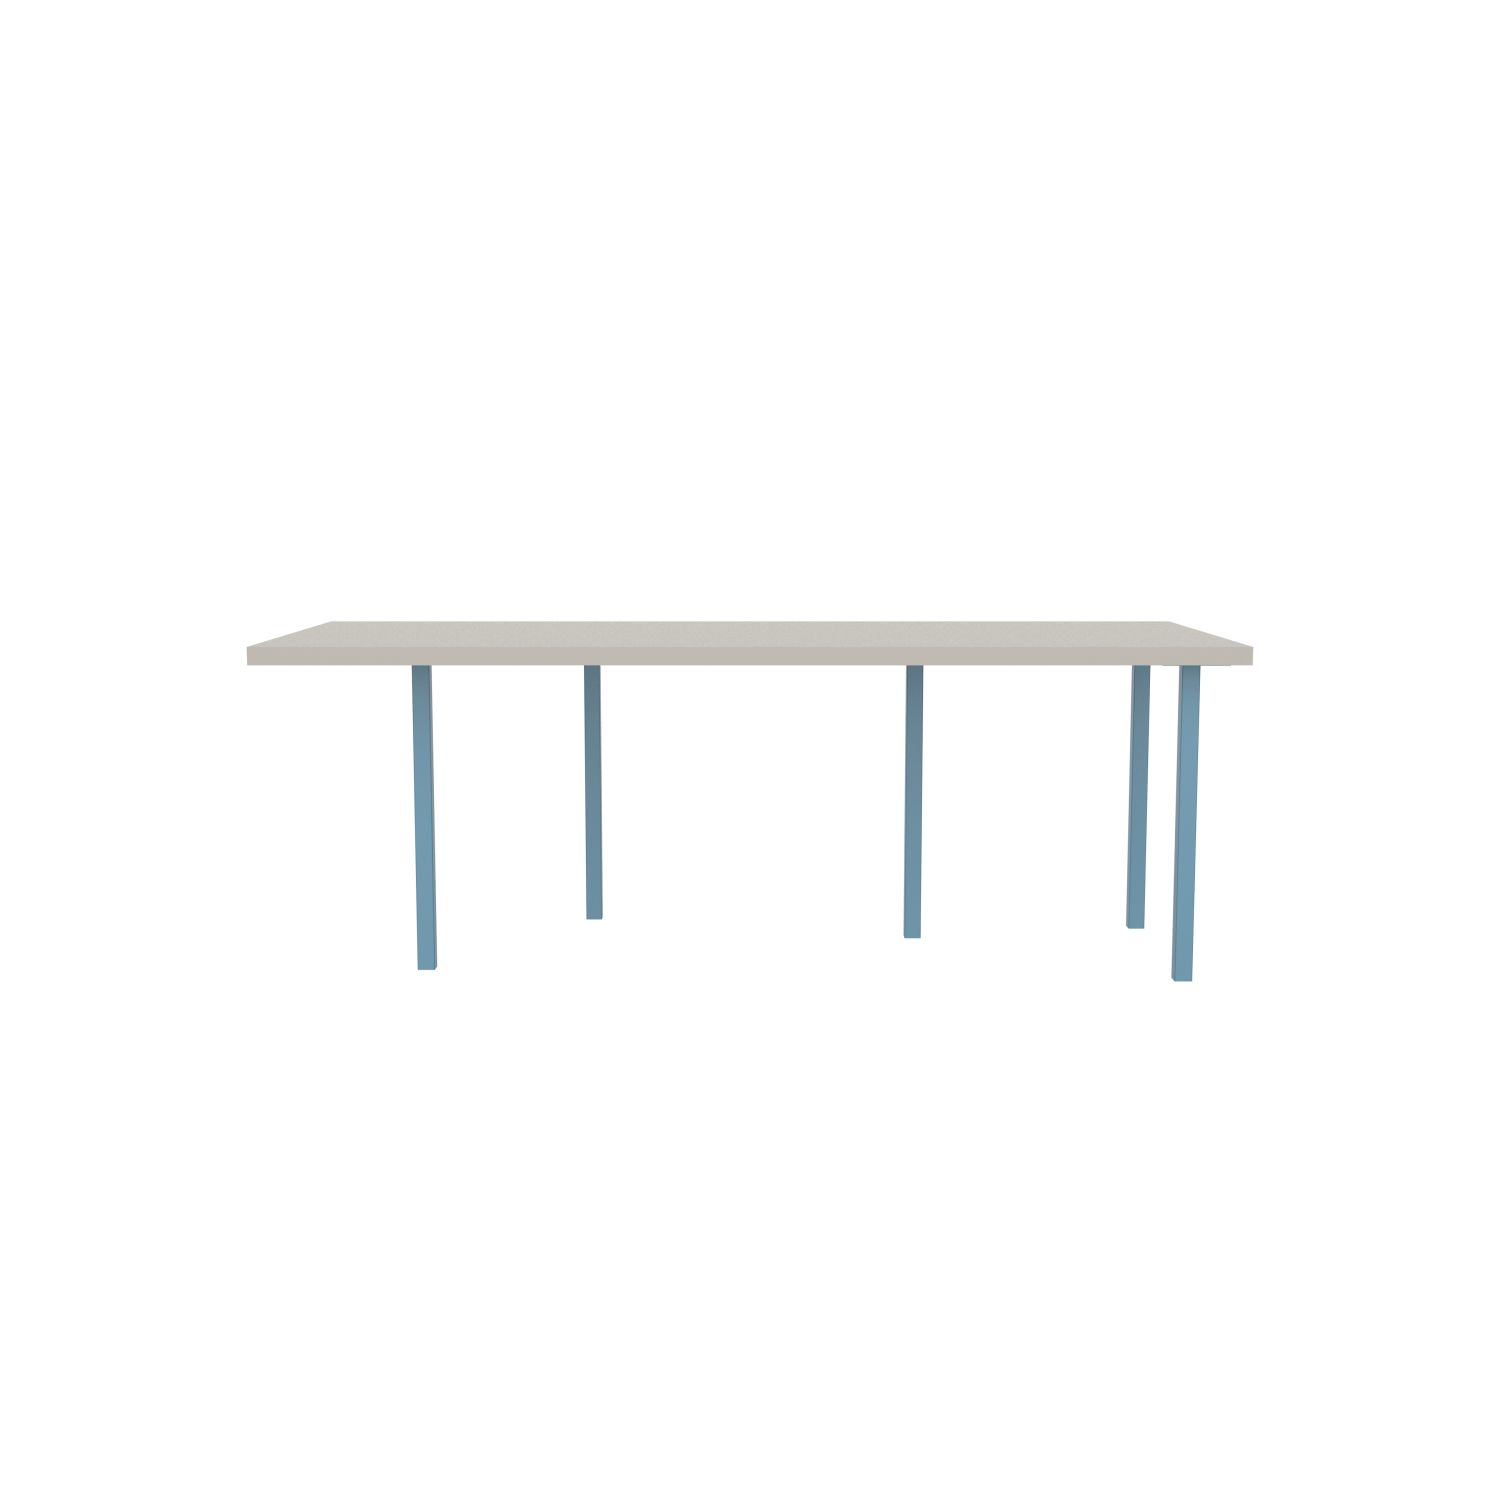 lensvelt bbrand table five fixed heigt 915x218 hpl white 50 mm price level 1 blue ral5024